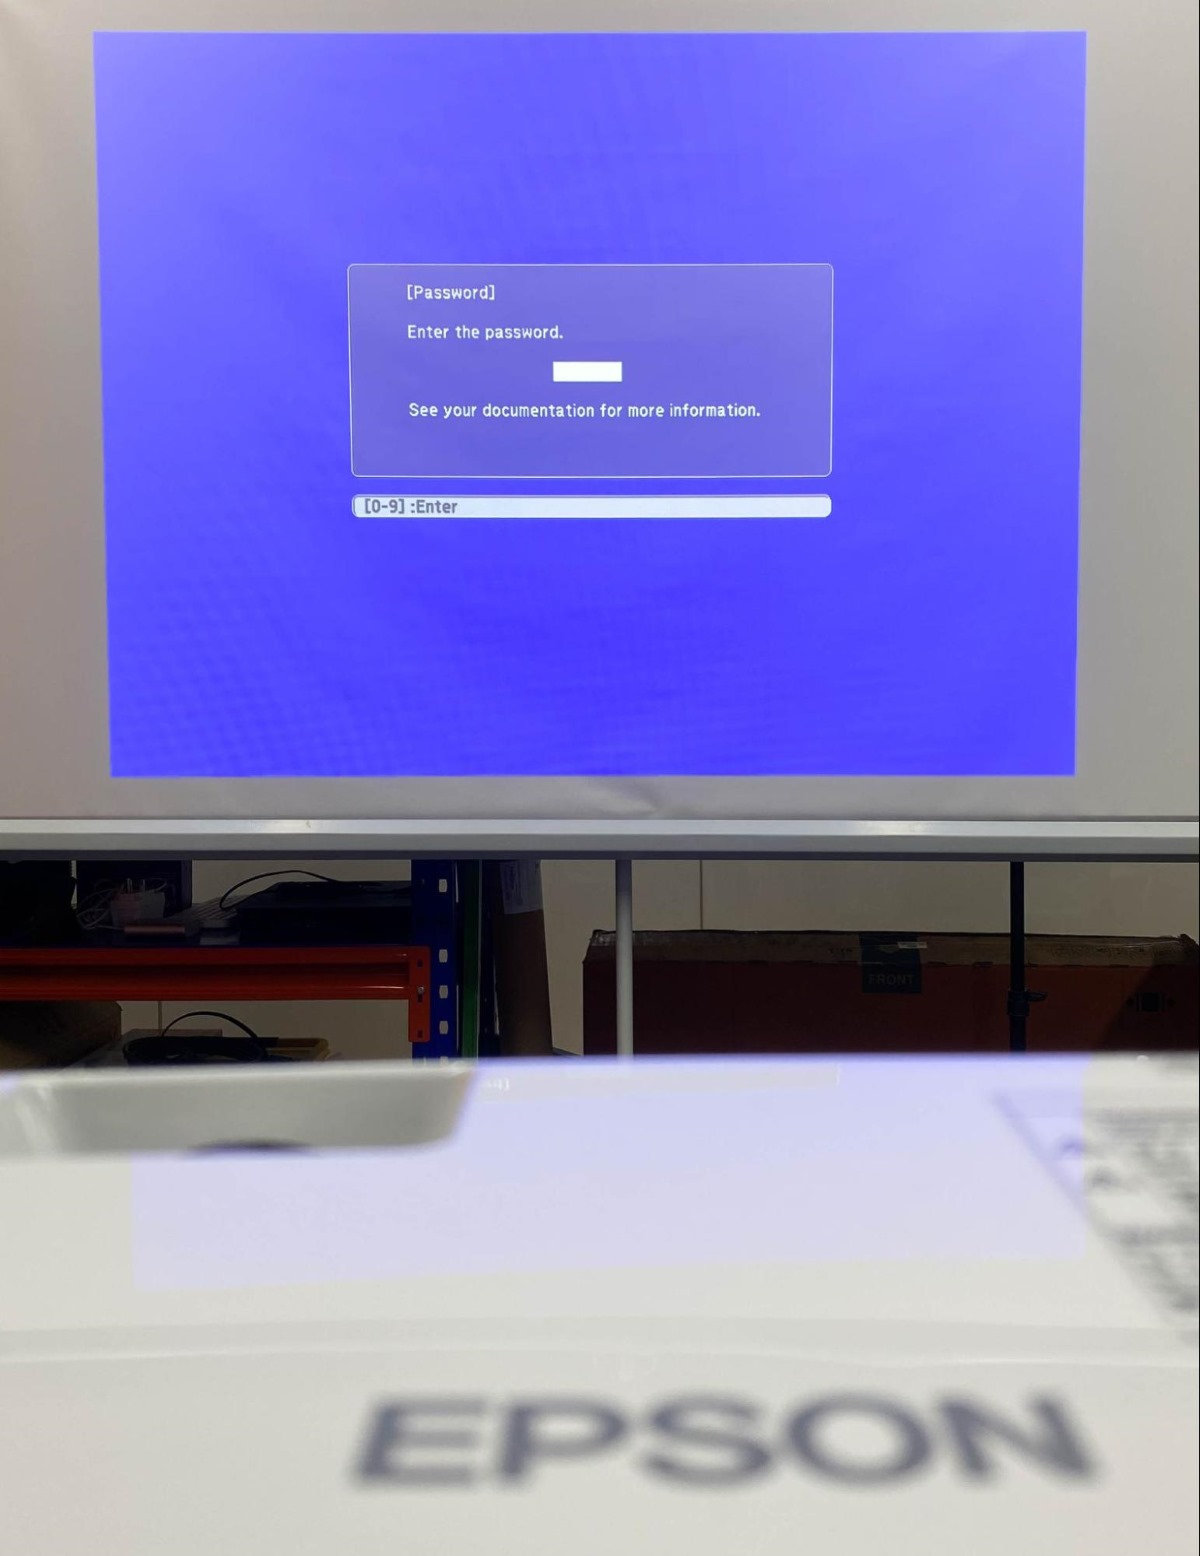 Epson projector is displaying the Enter password screen